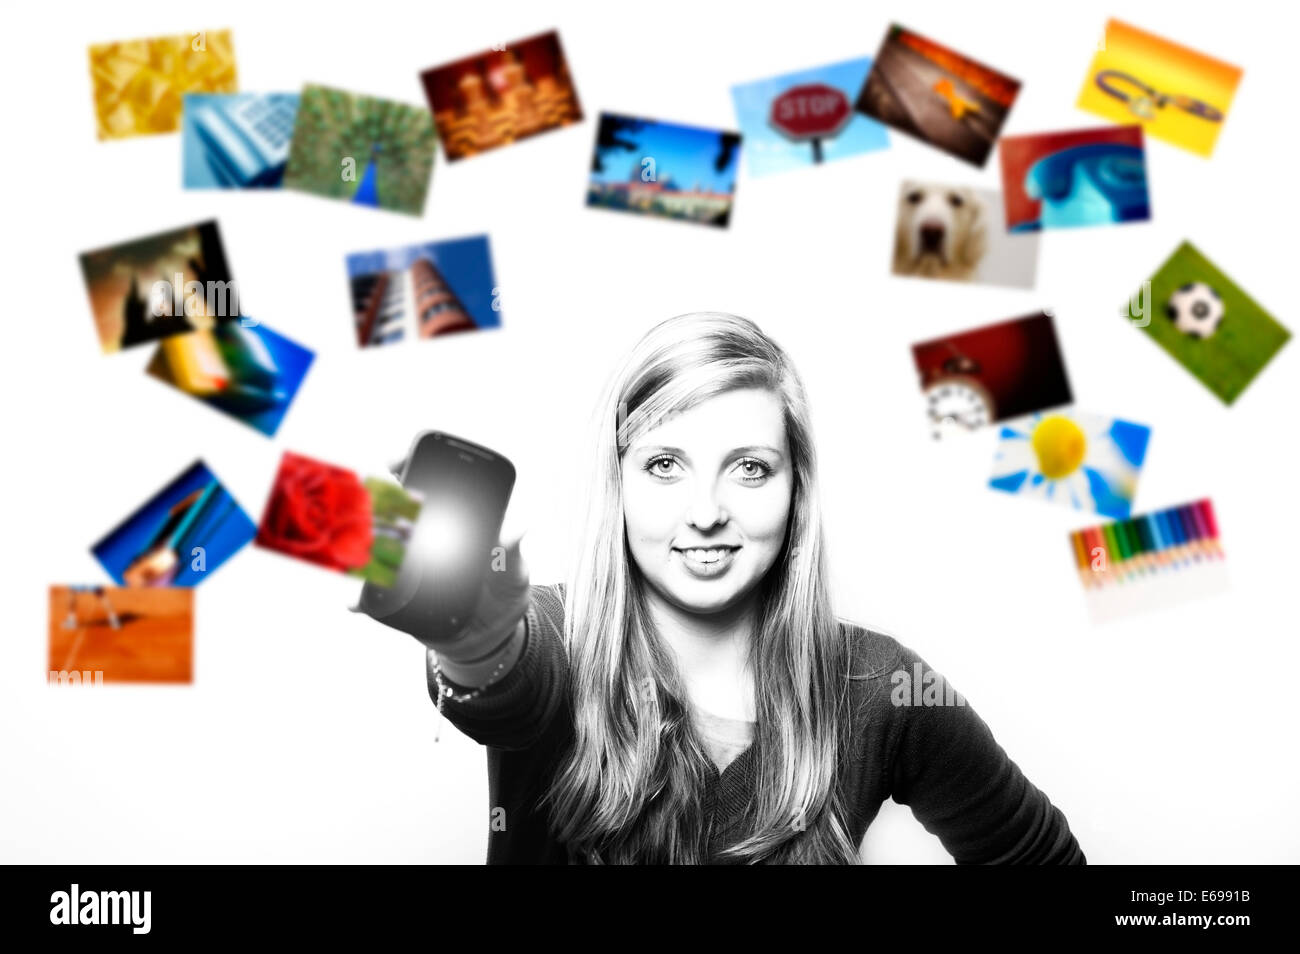 girl showing her smartphone with photos flowing around Stock Photo